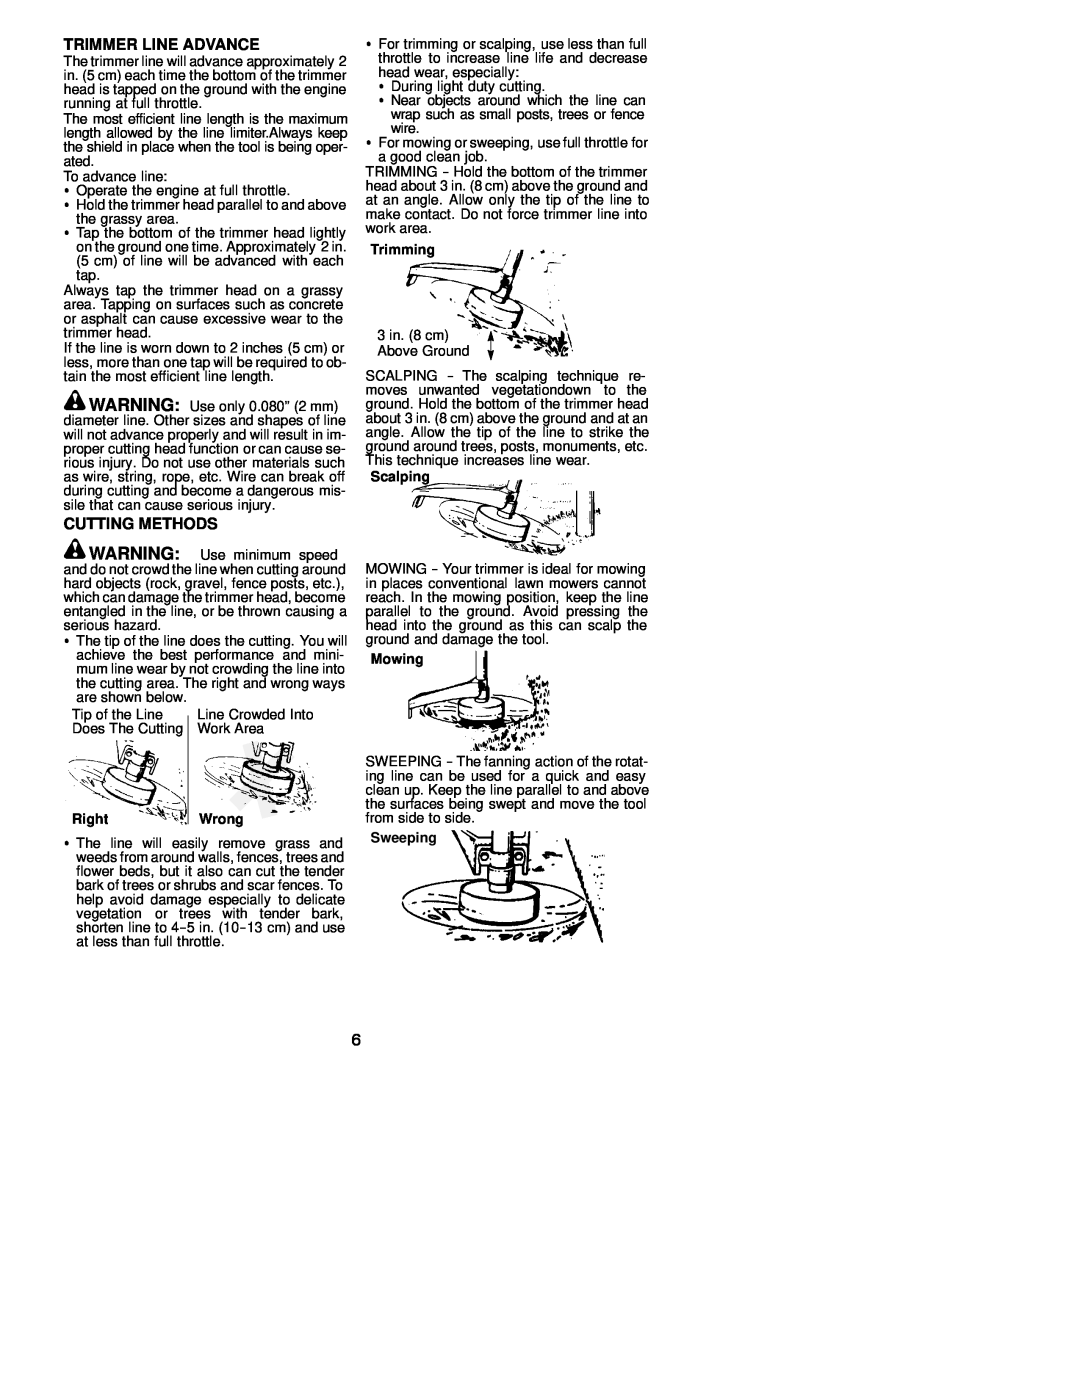 Weed Eater 530163439 instruction manual Trimmer Line Advance, Cutting Methods, Right, Trimming, Scalping, Mowing, Sweeping 